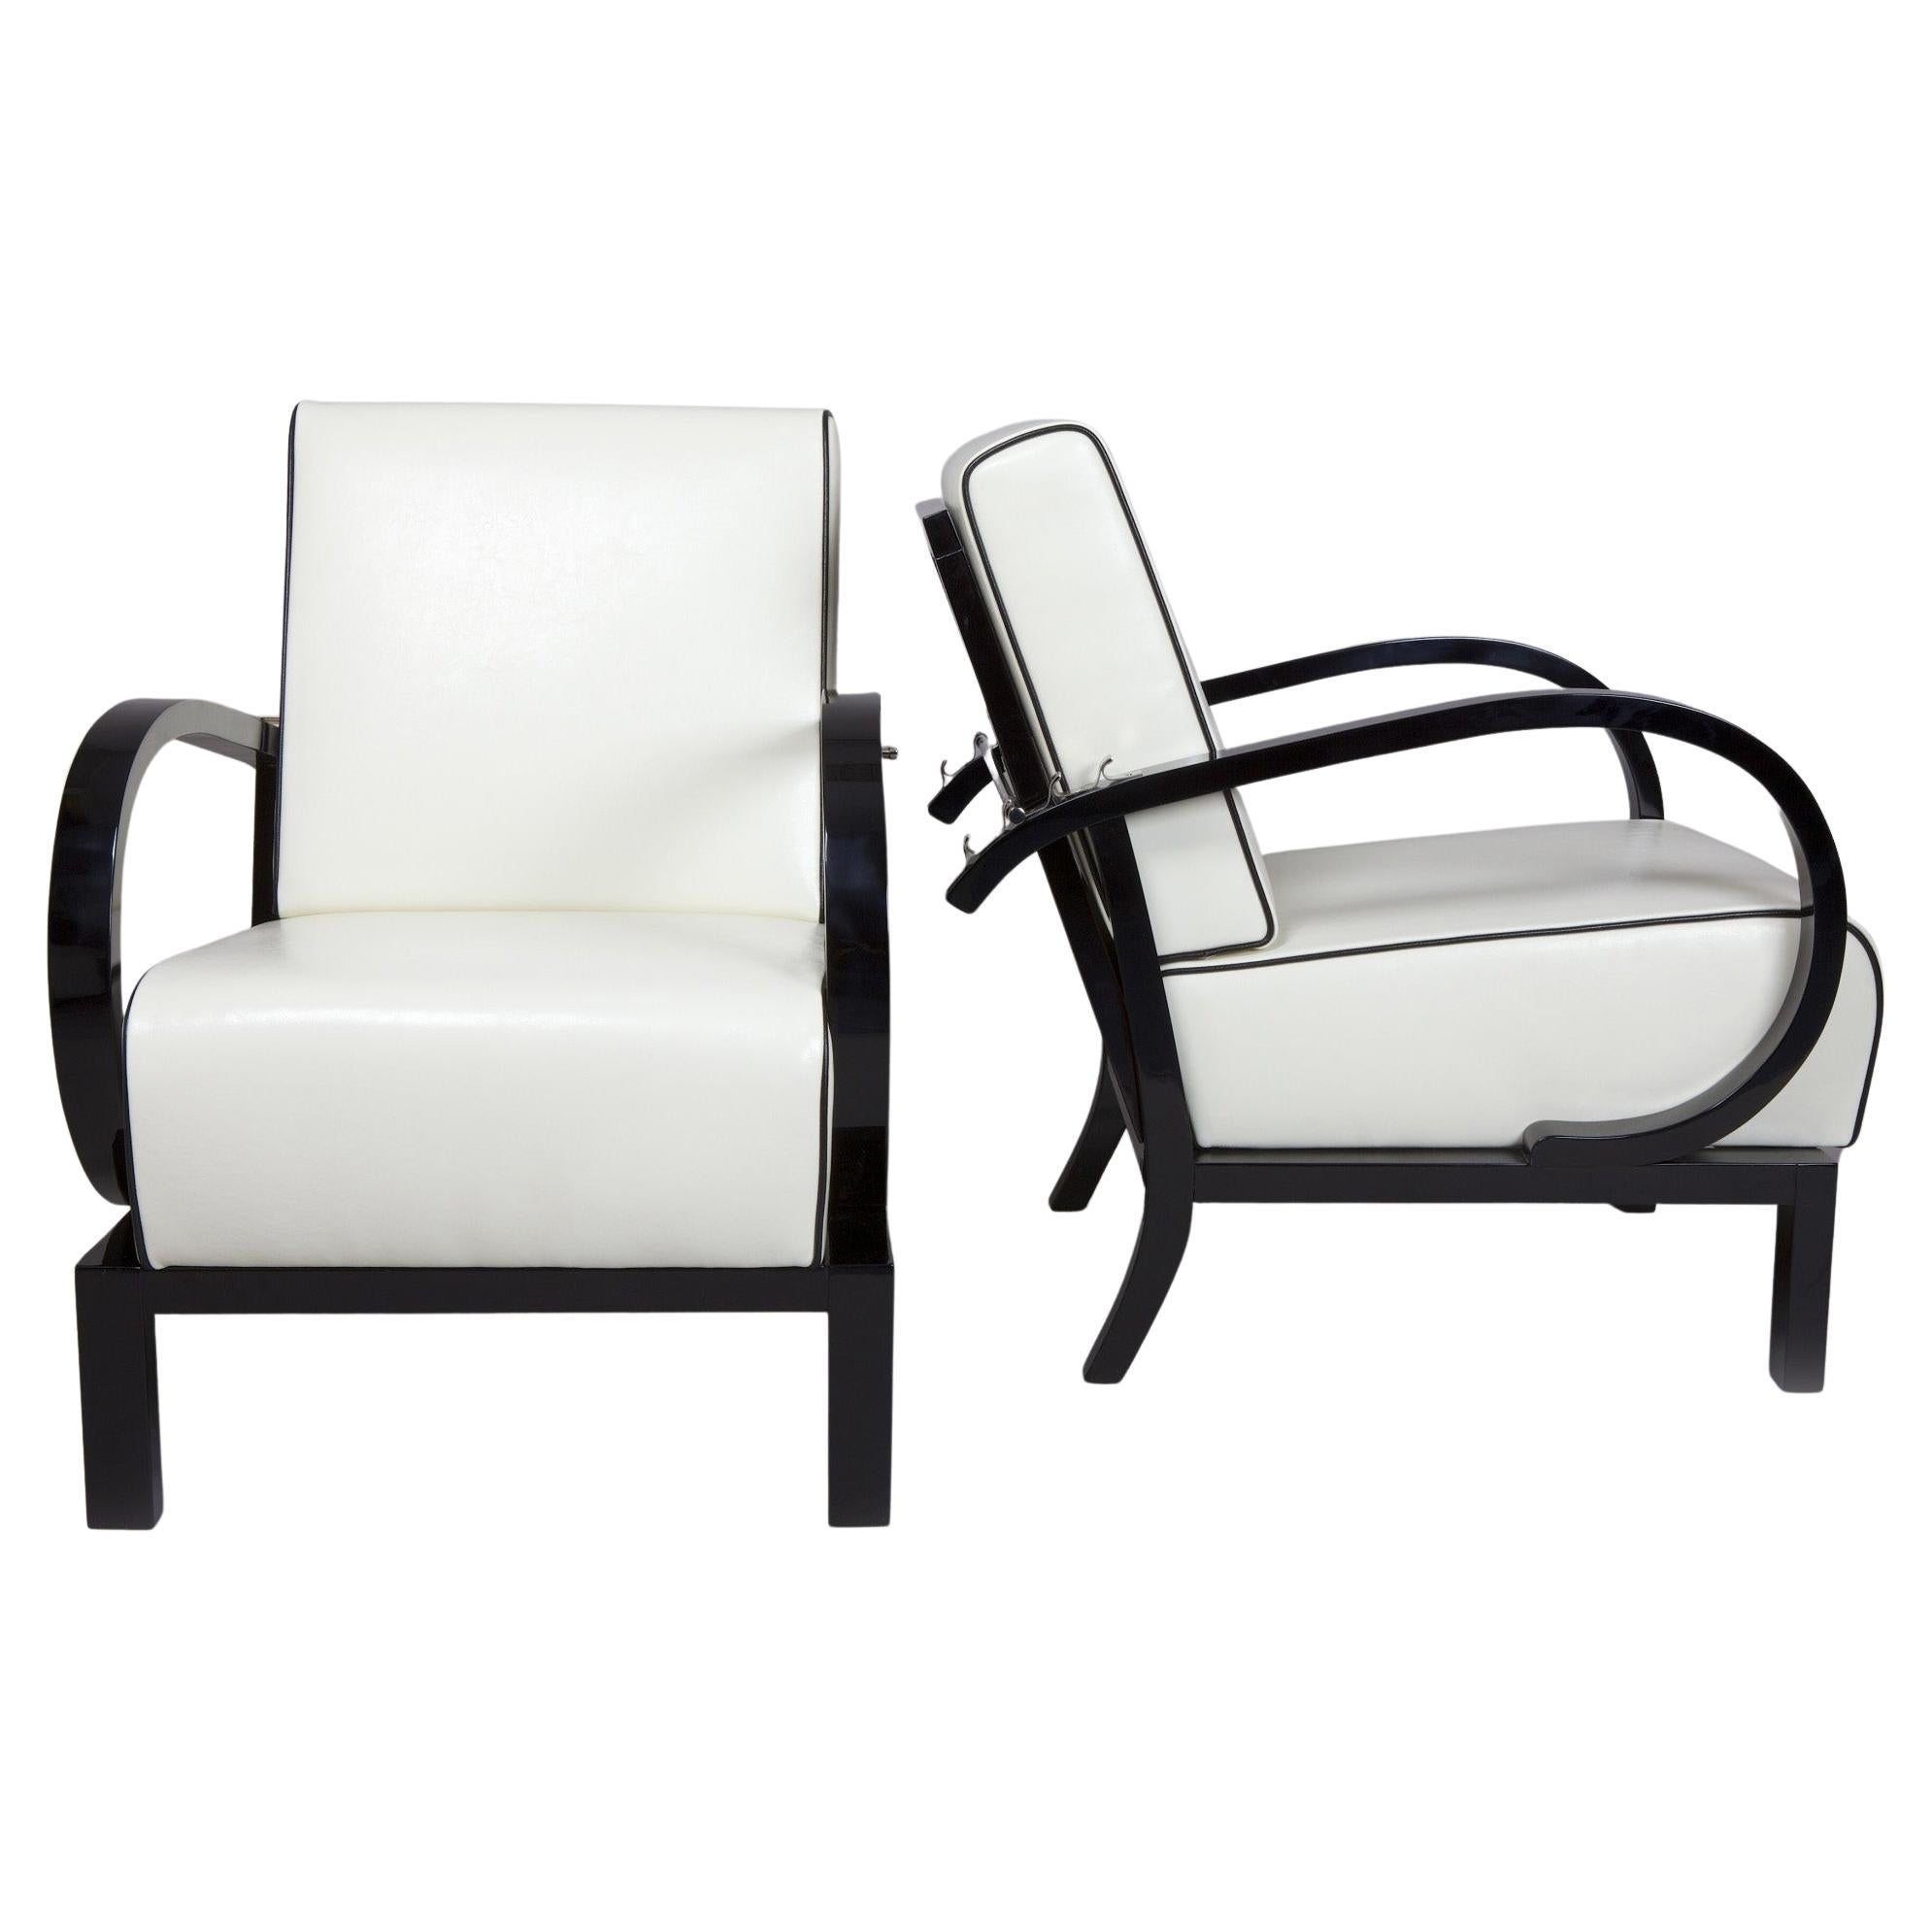 Pair of White Functionalism Armchairs from Czechoslovakia by Jindrich Halabala For Sale